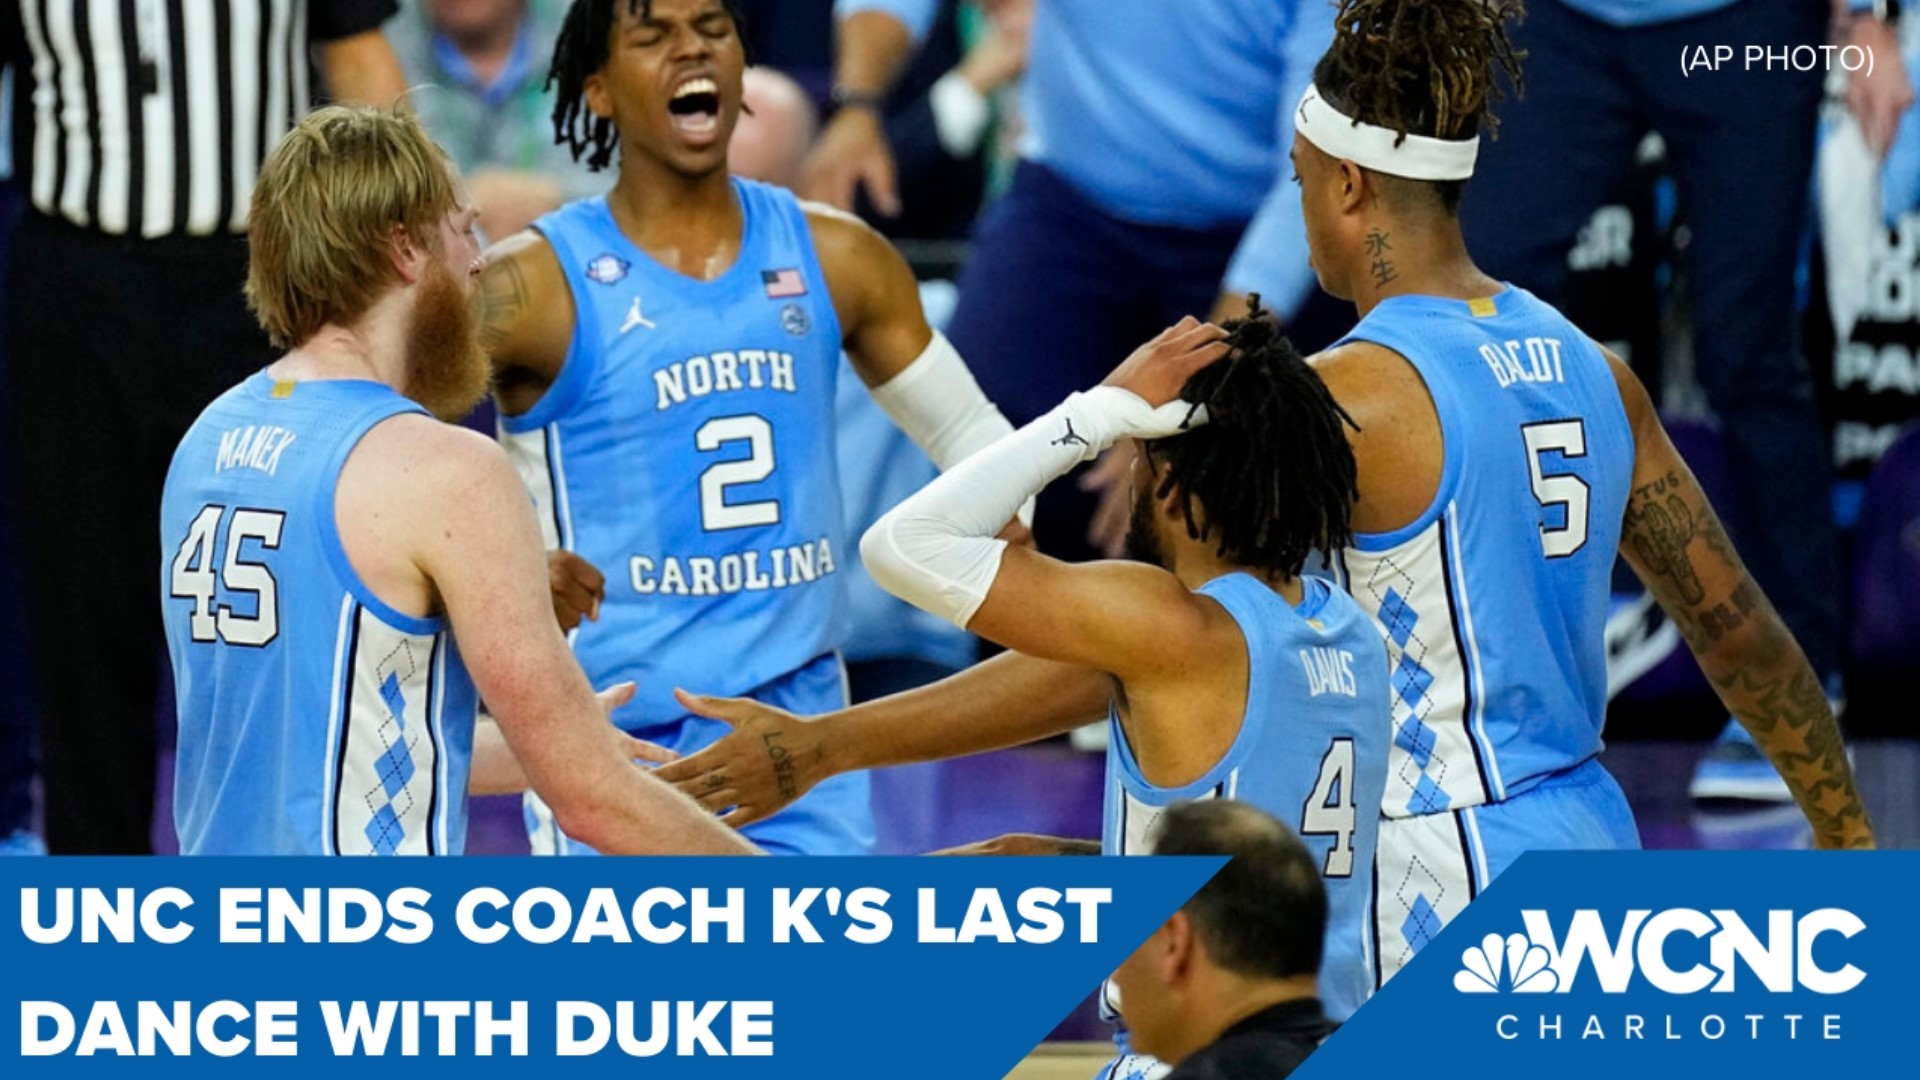 Coach K's career ends with a loss to the Tar Heels.